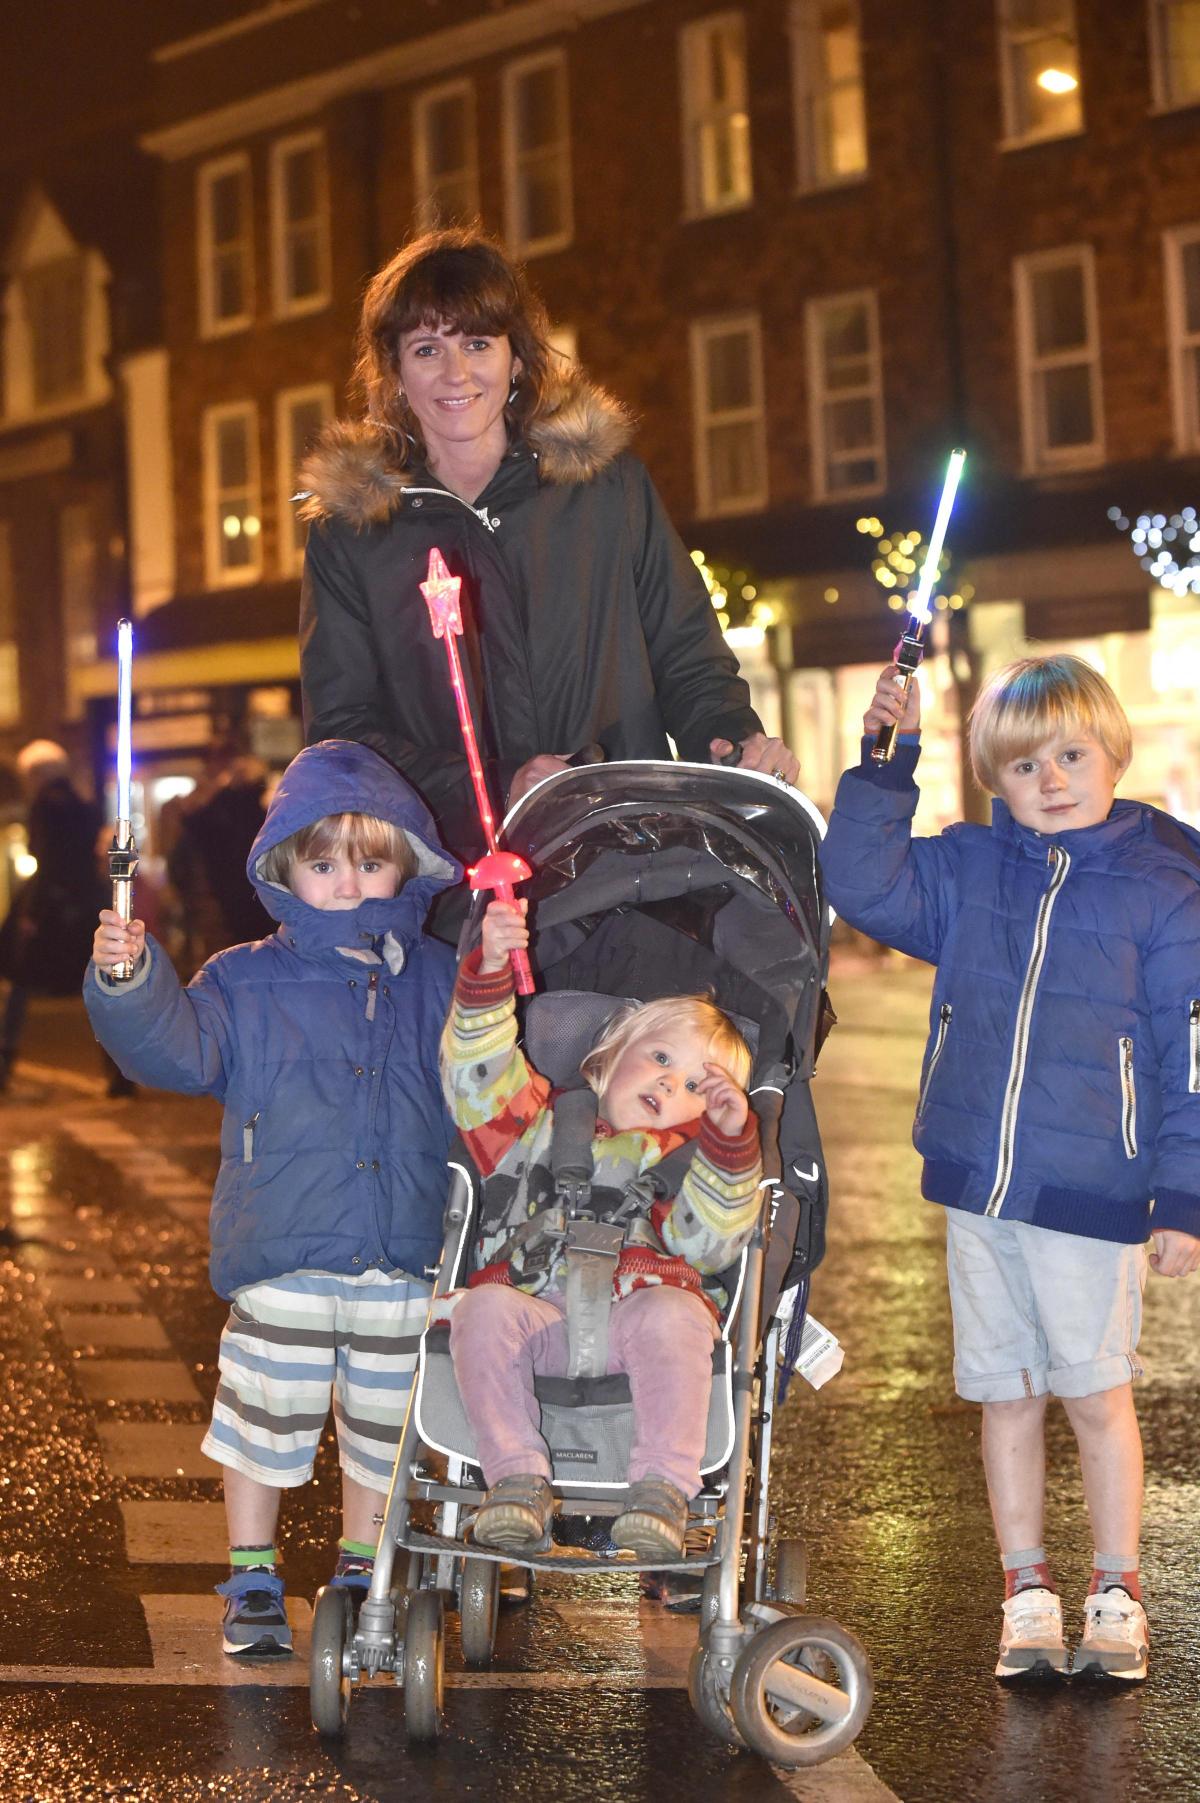 Diane Vose was on hand to photograph all the fun at Marlborough Christmas Festival 